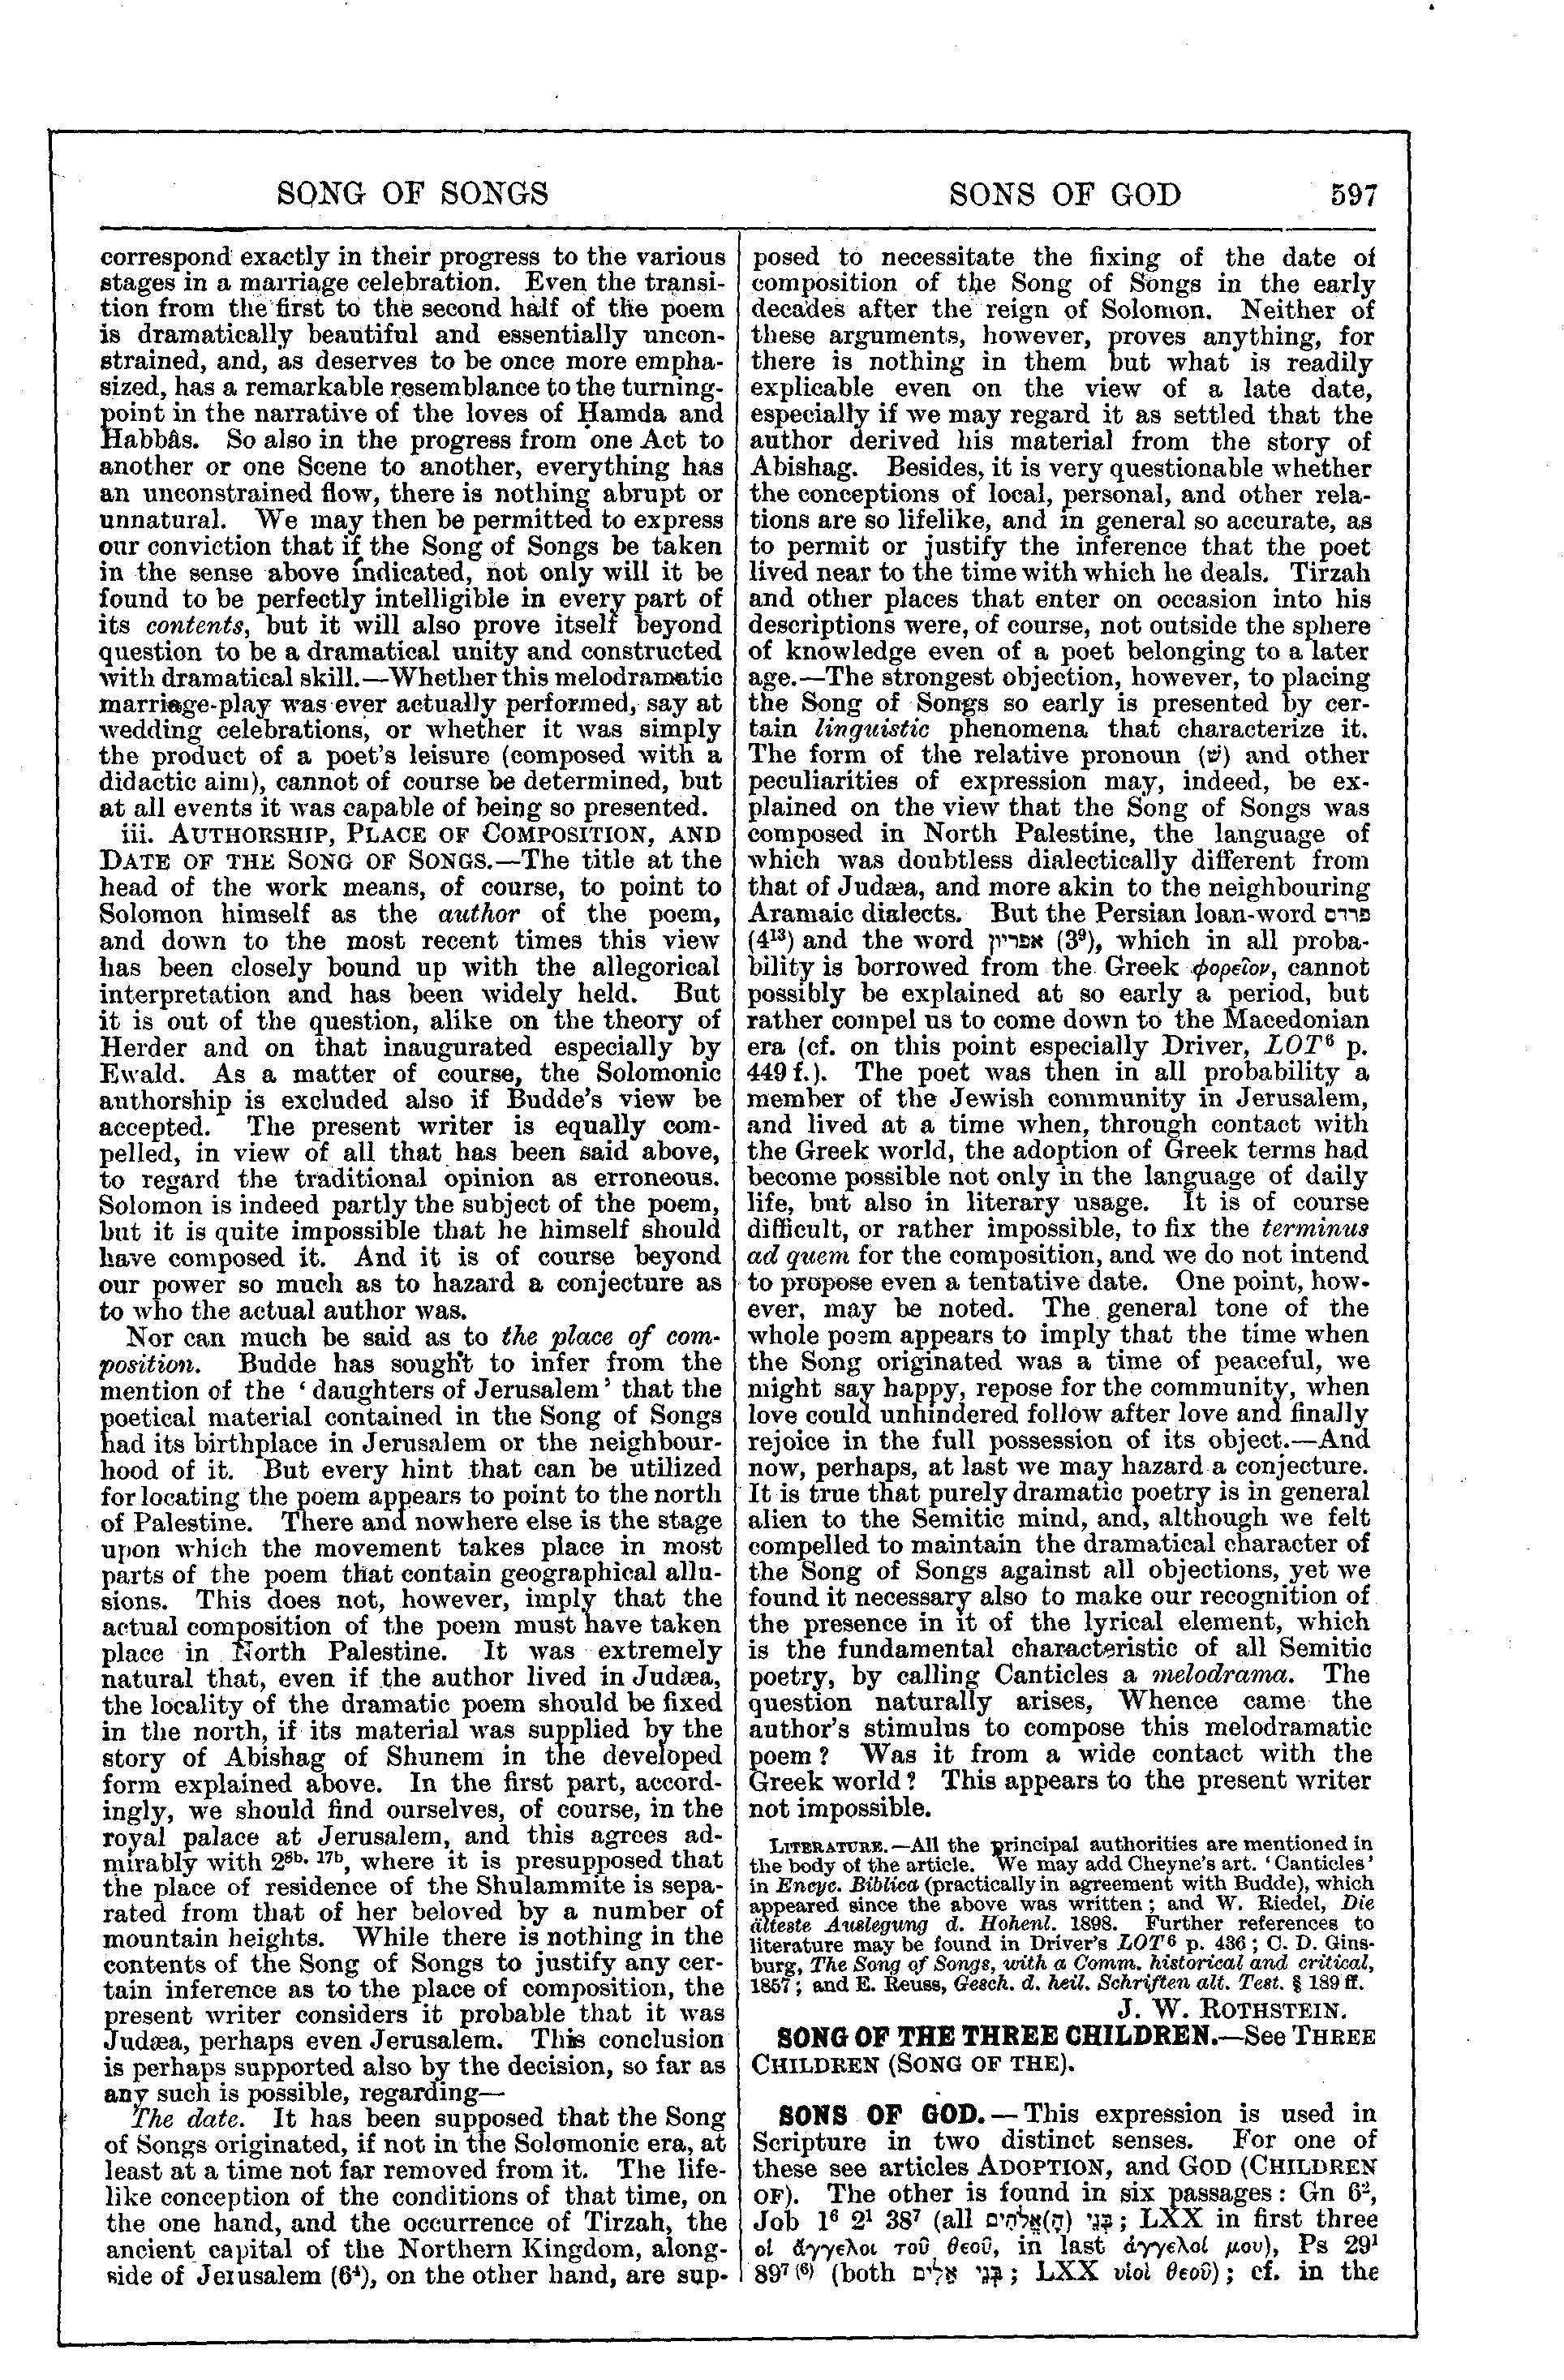 Image of page 597